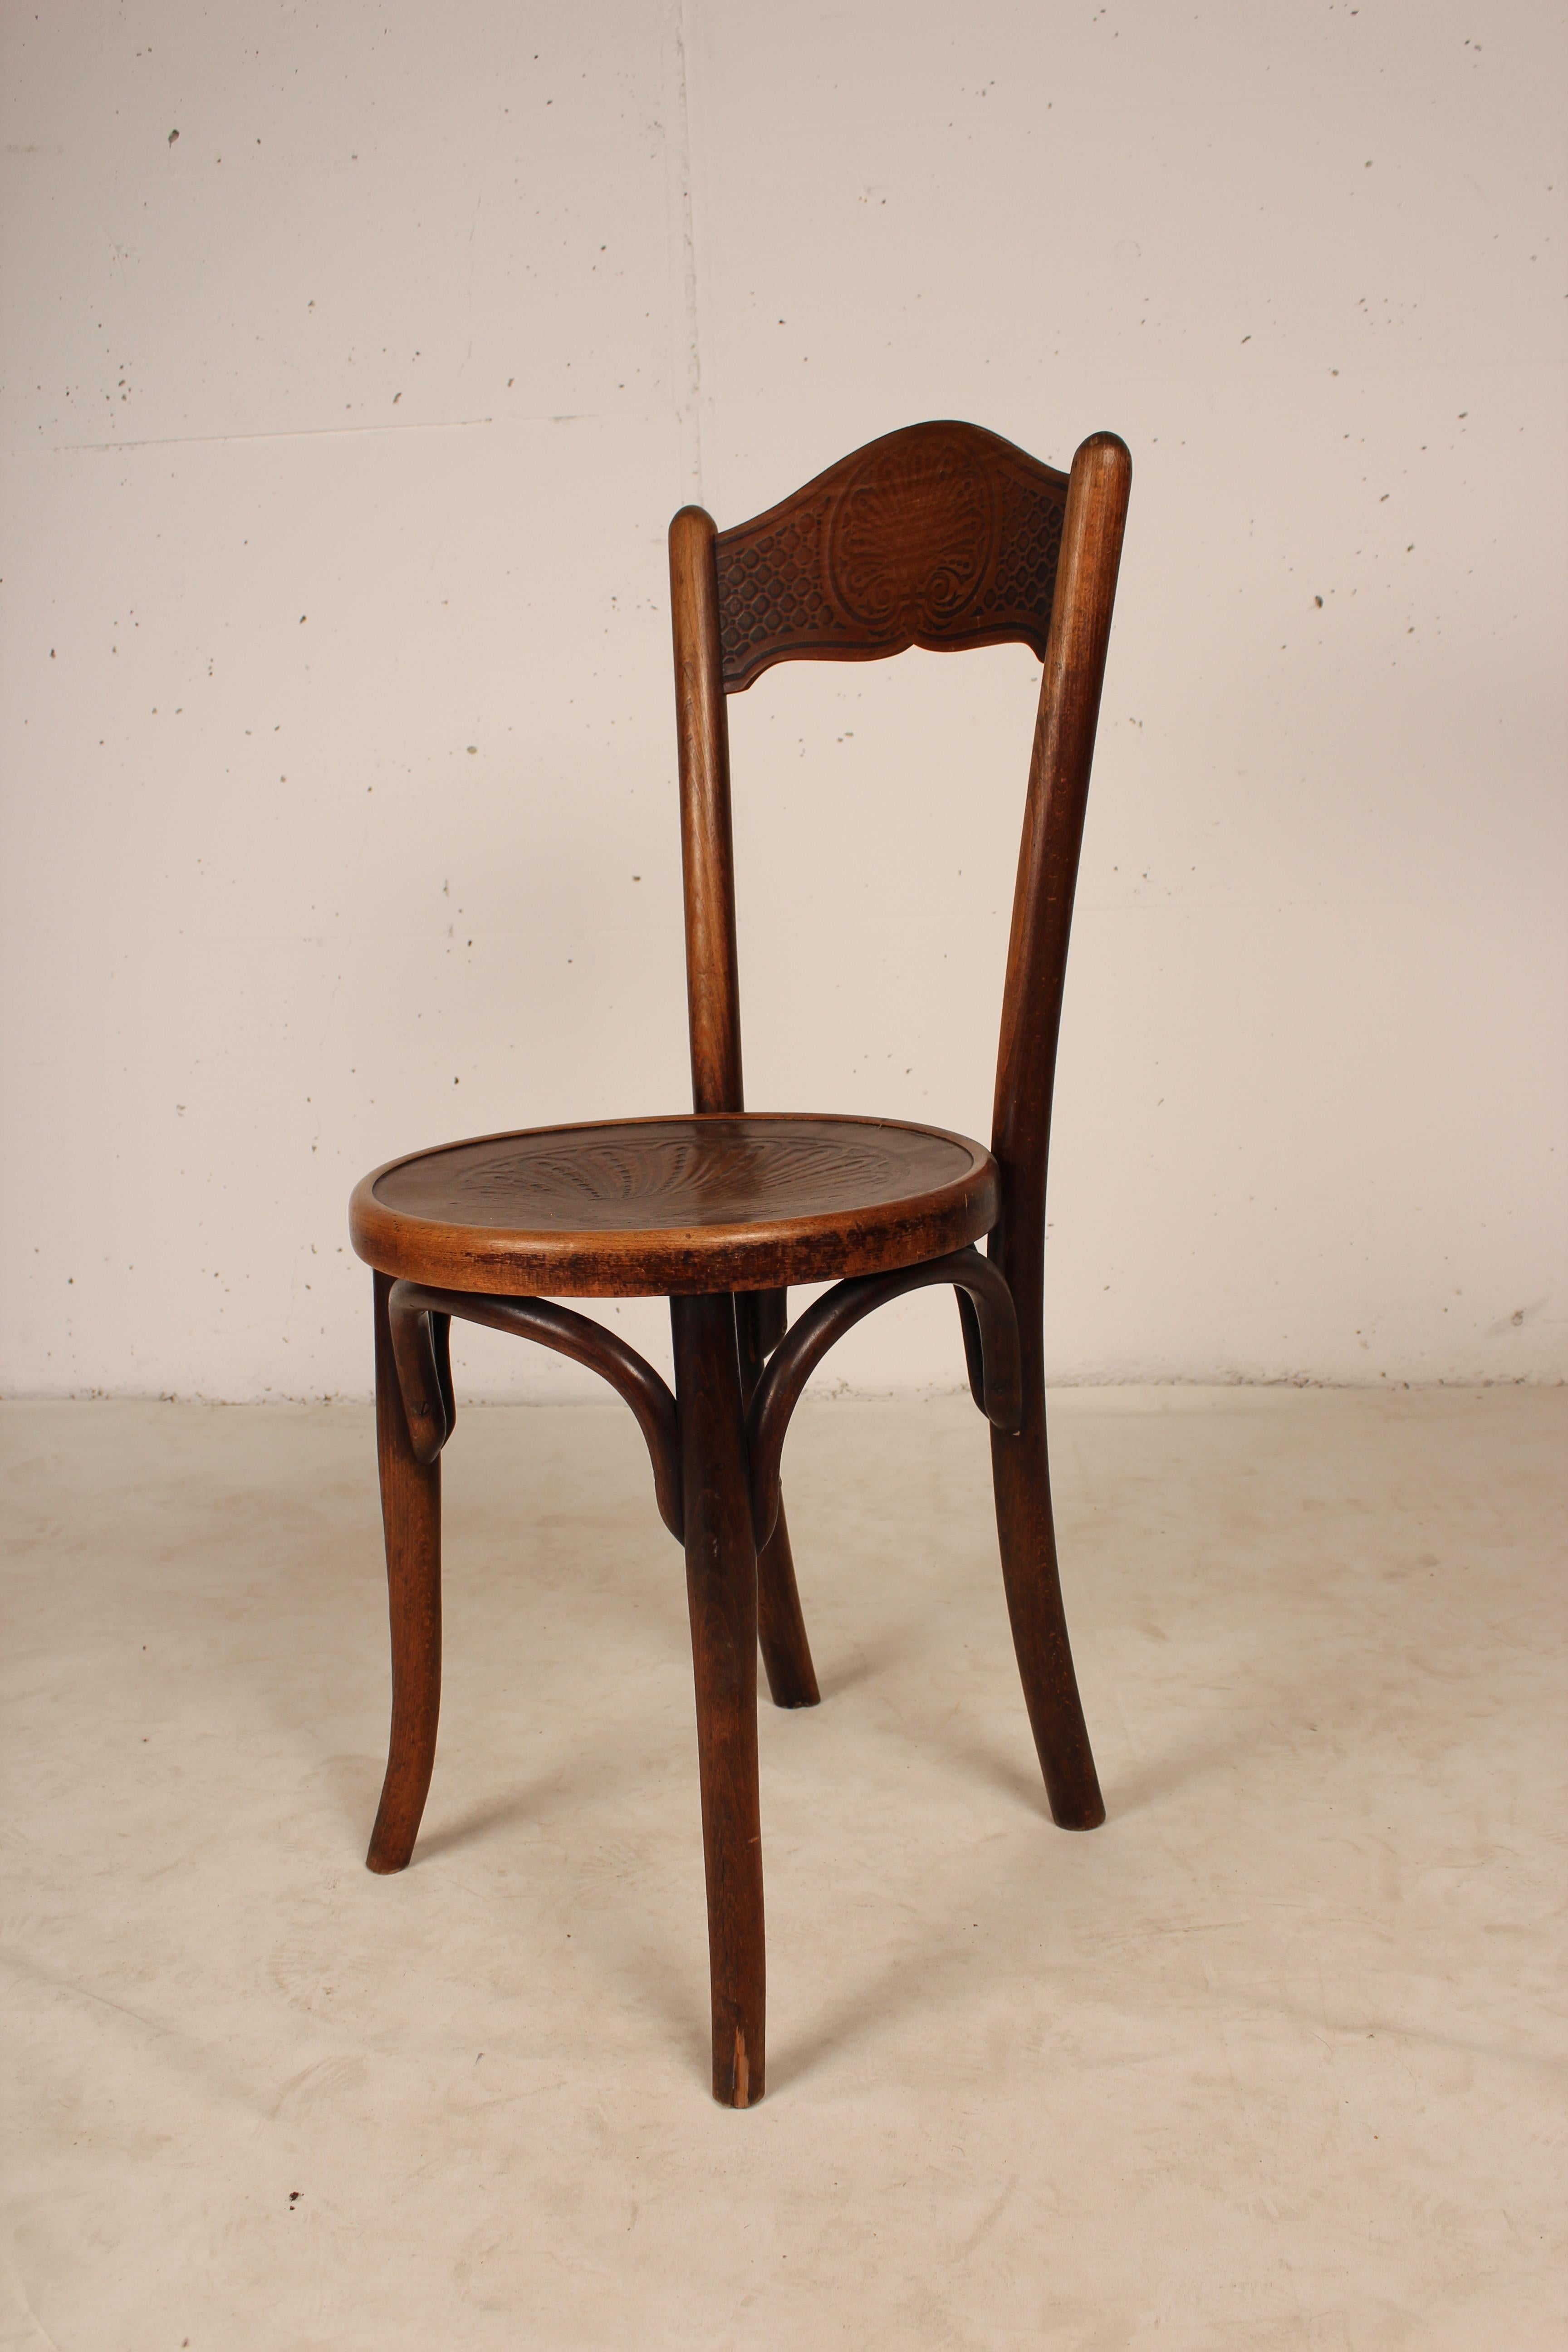 Set of 6 Bistro Chairs by Jacob & Josef Kohn, 1890 Austro-Hungarian Empire For Sale 5